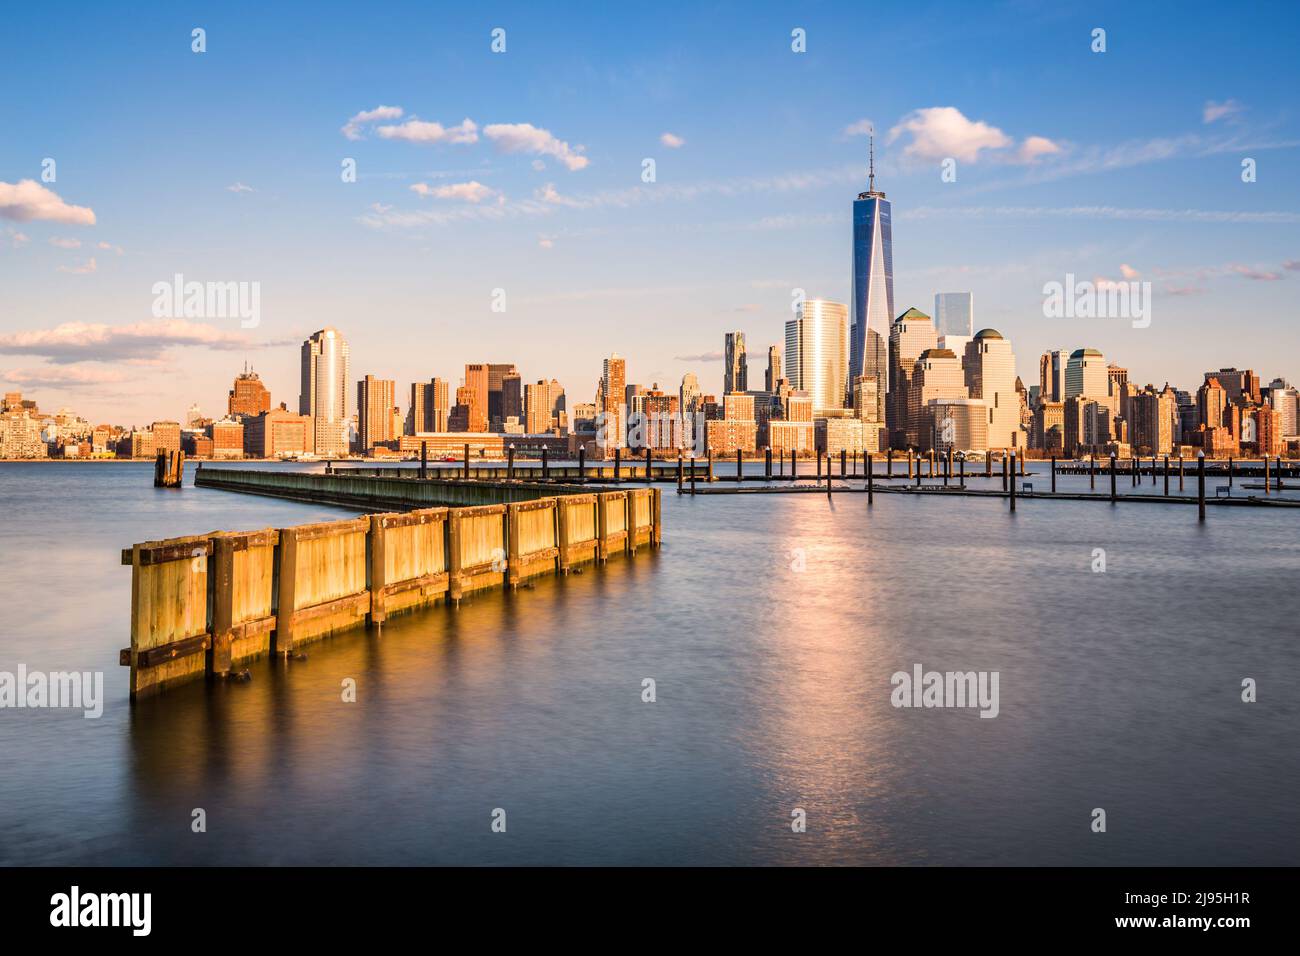 Downtown New York as observed from Jersey City, across the Hudson River. The Financial District skyscrapers have an orange glow under a bright sunset Stock Photo